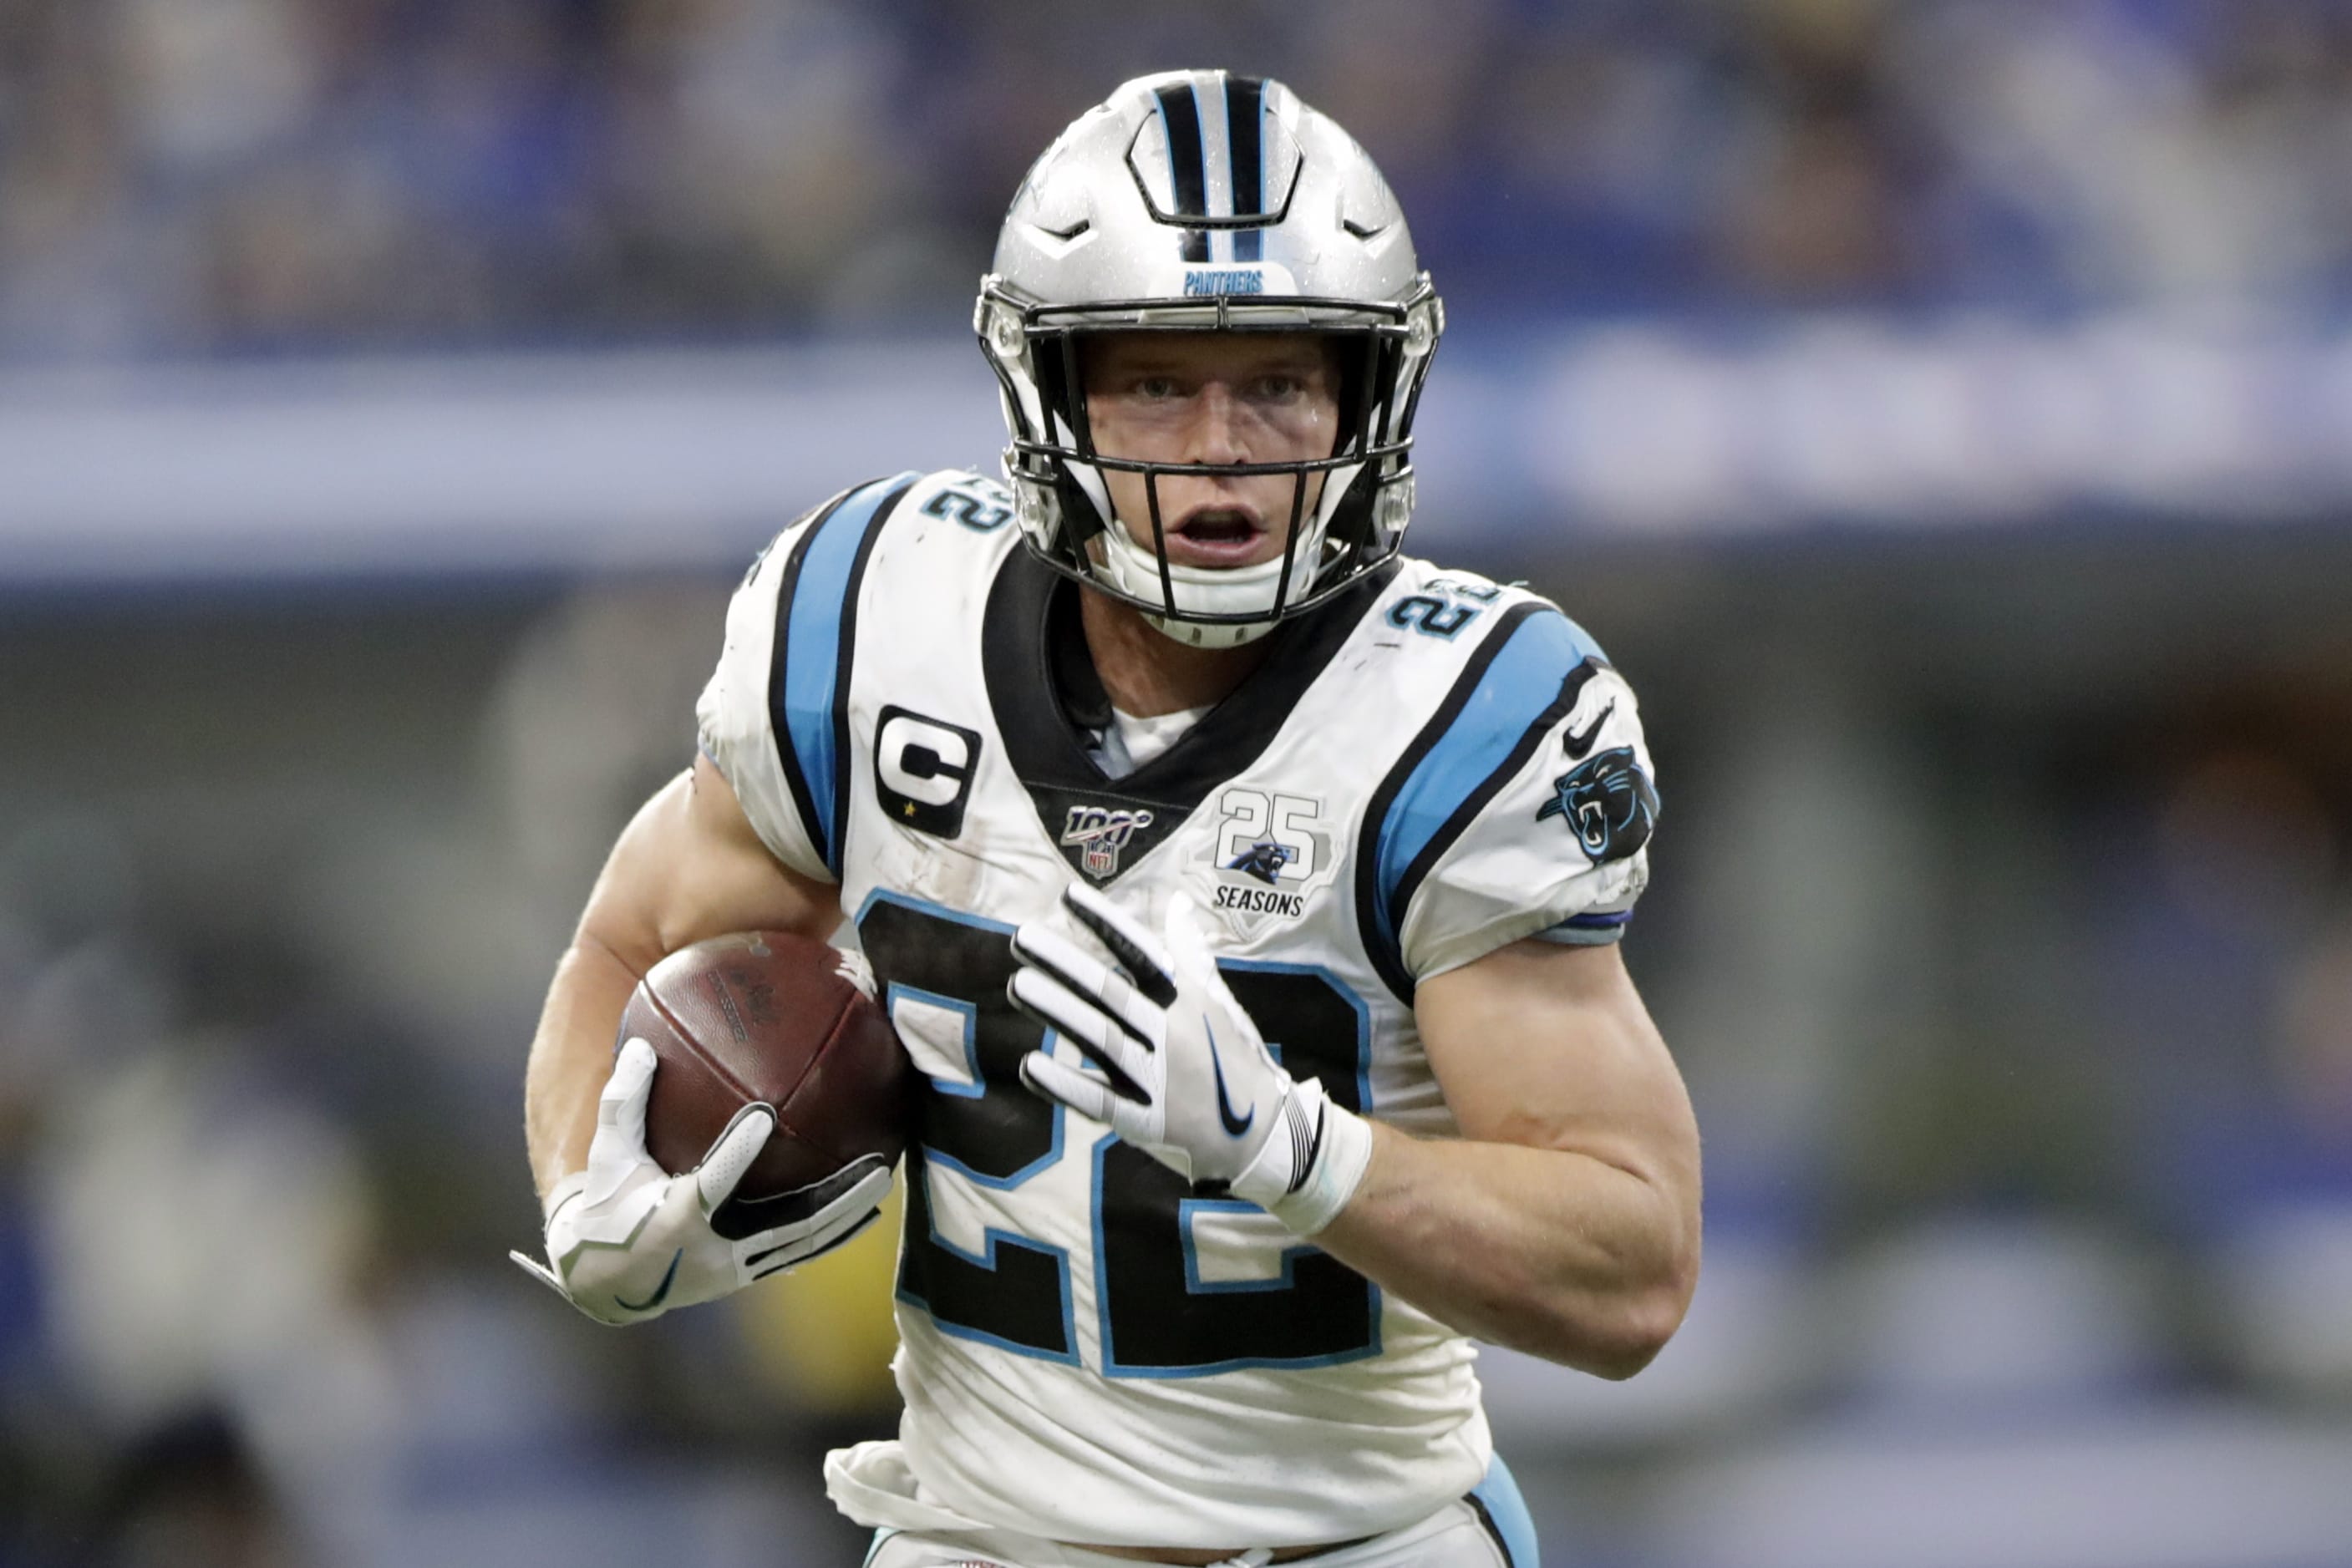 CChristian McCaffrey's versatility and superb statistics helped him to a rare double: The Carolina Panthers running back has made The Associated Press NFL All-Pro Team at two positions.